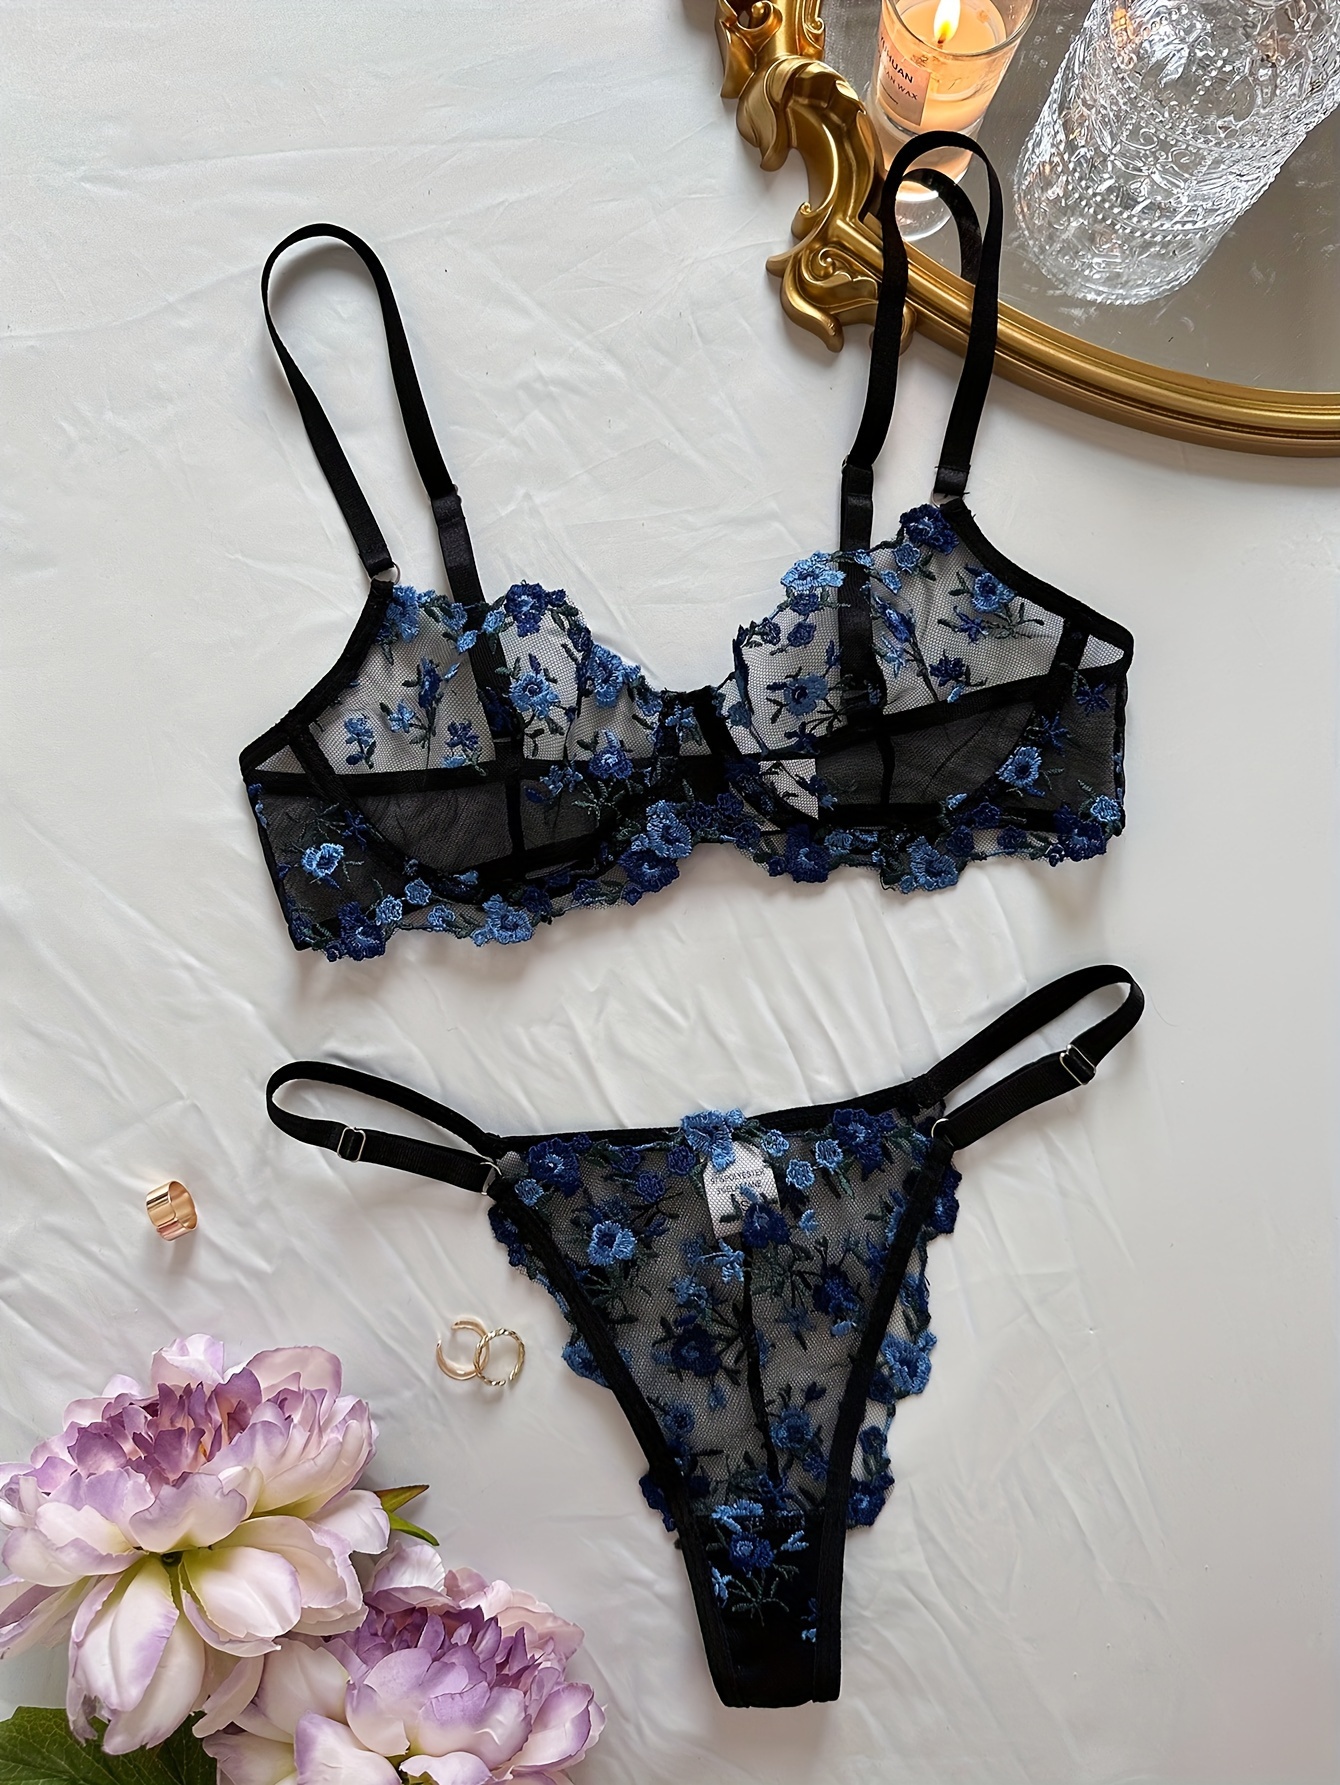 RQYYD Lingerie Set for Women Floral Embroidered Mesh Bra and Panty